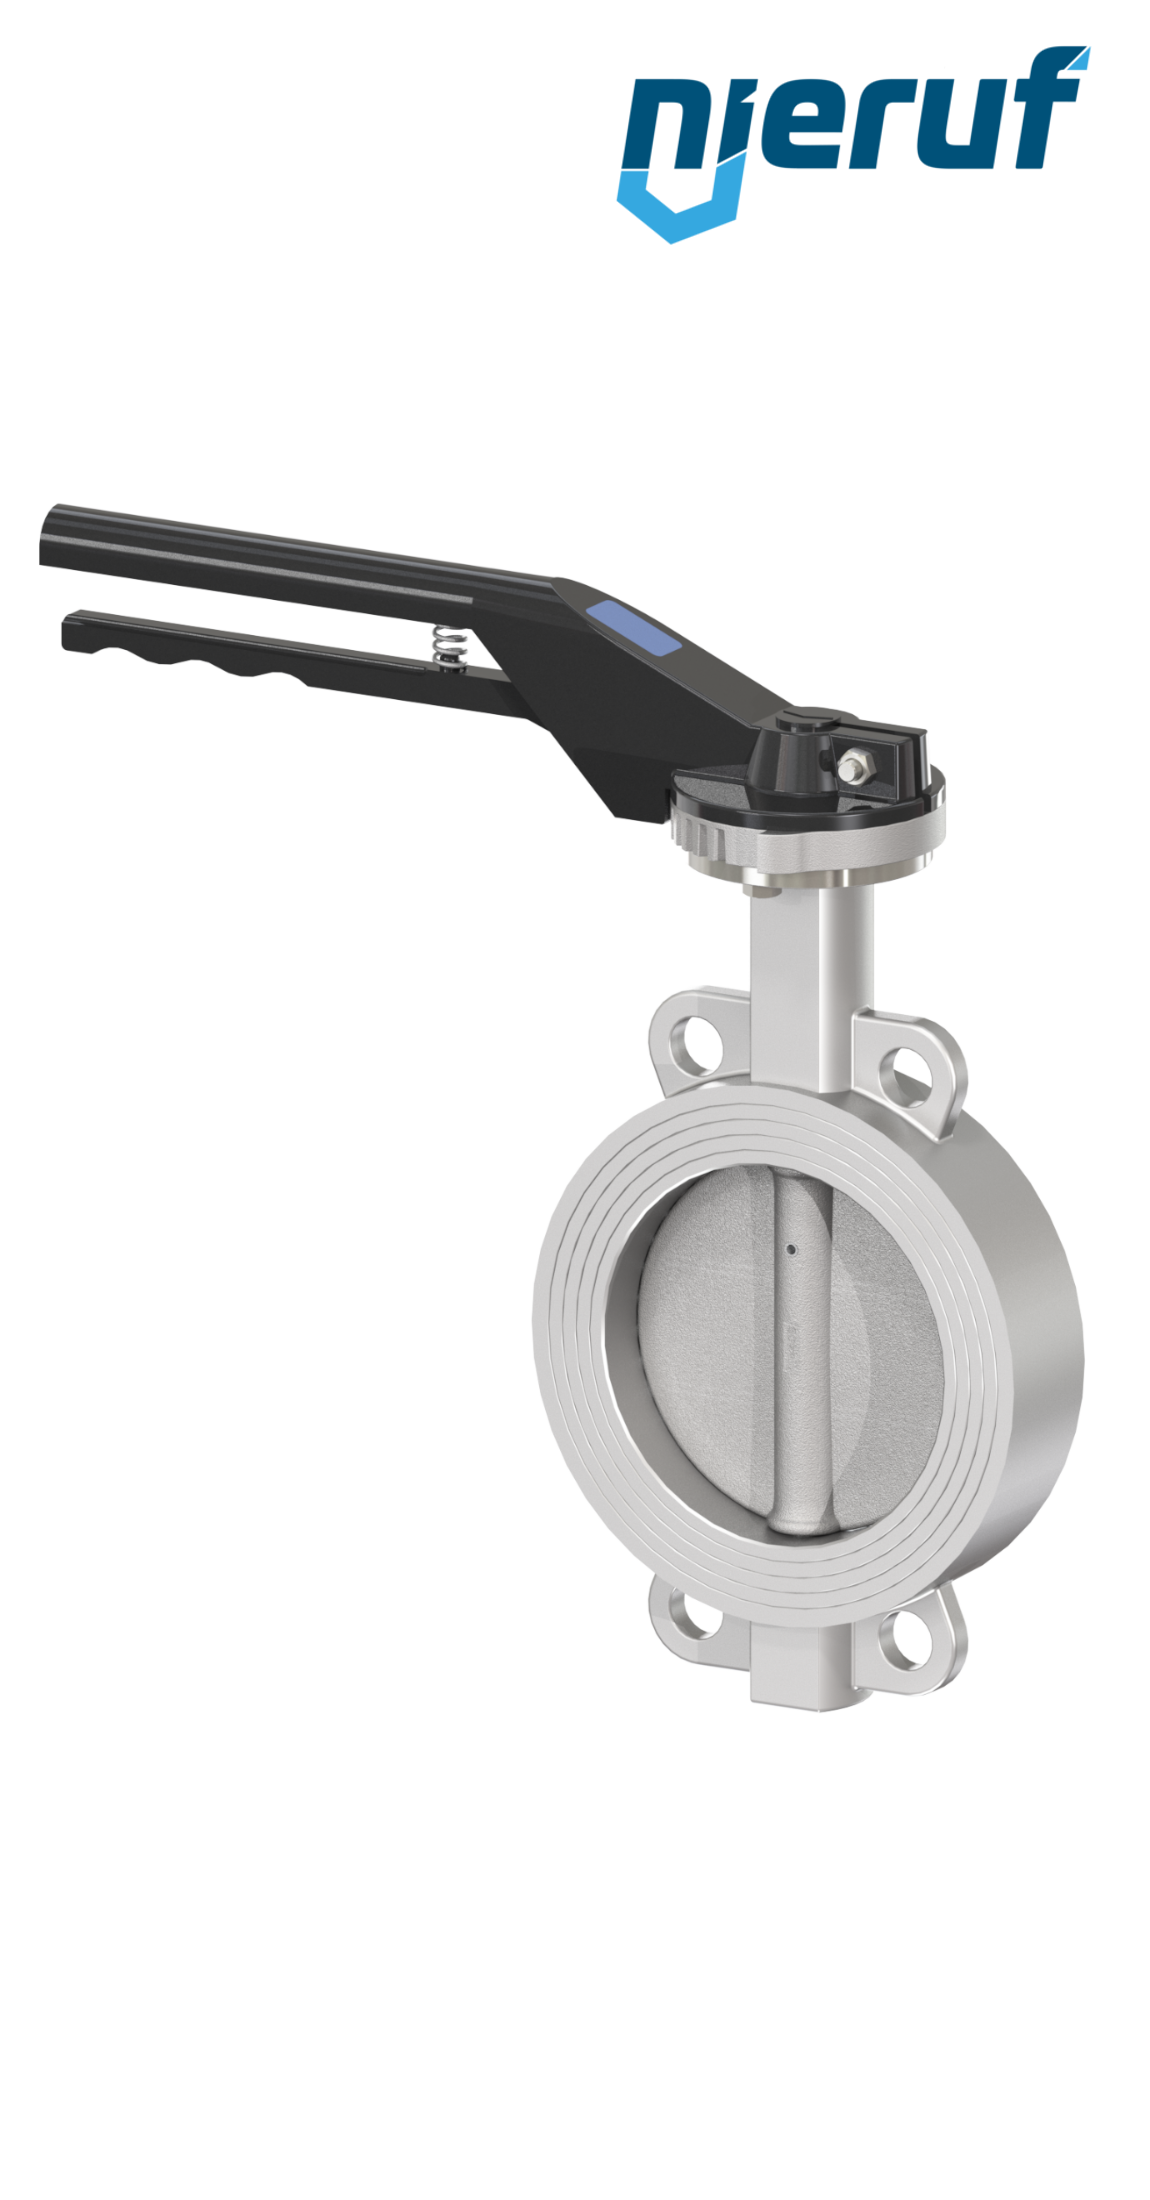 Butterfly-valve-stainless-steel DN40 PN16 AK08 metall notch lever